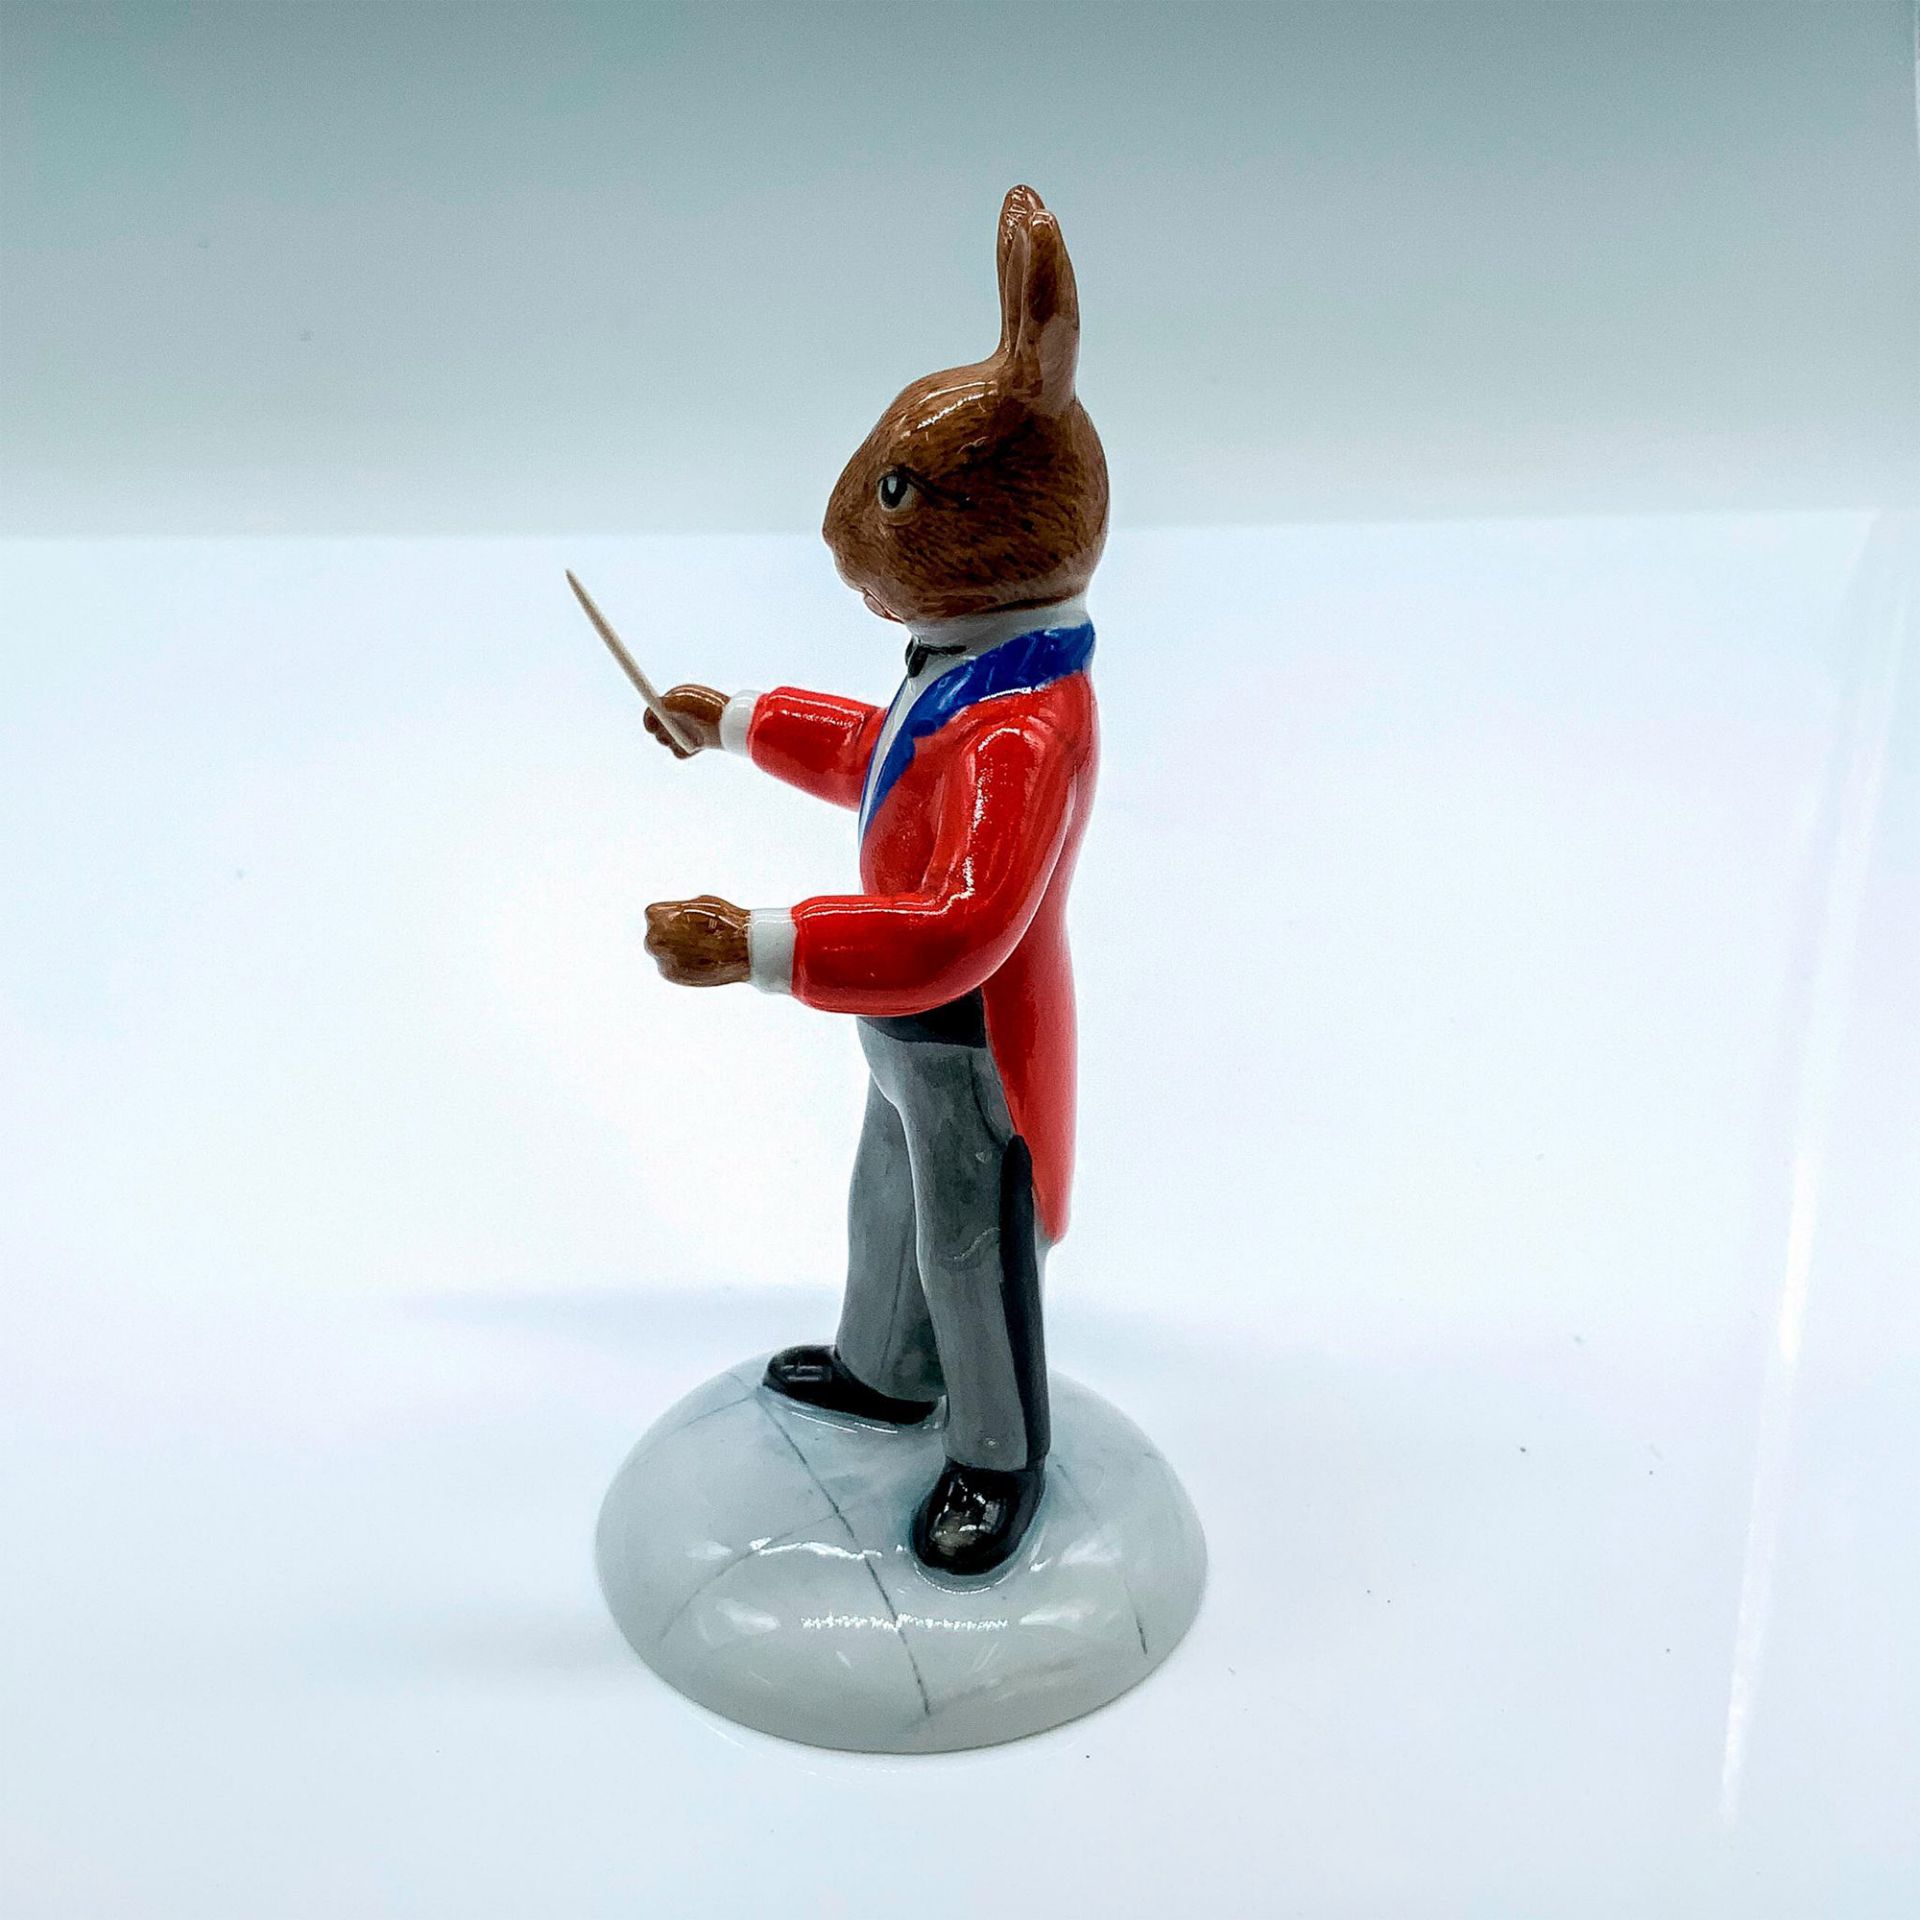 Royal Doulton Bunnykins LE Figurine, The Conductor DB396 - Image 2 of 5